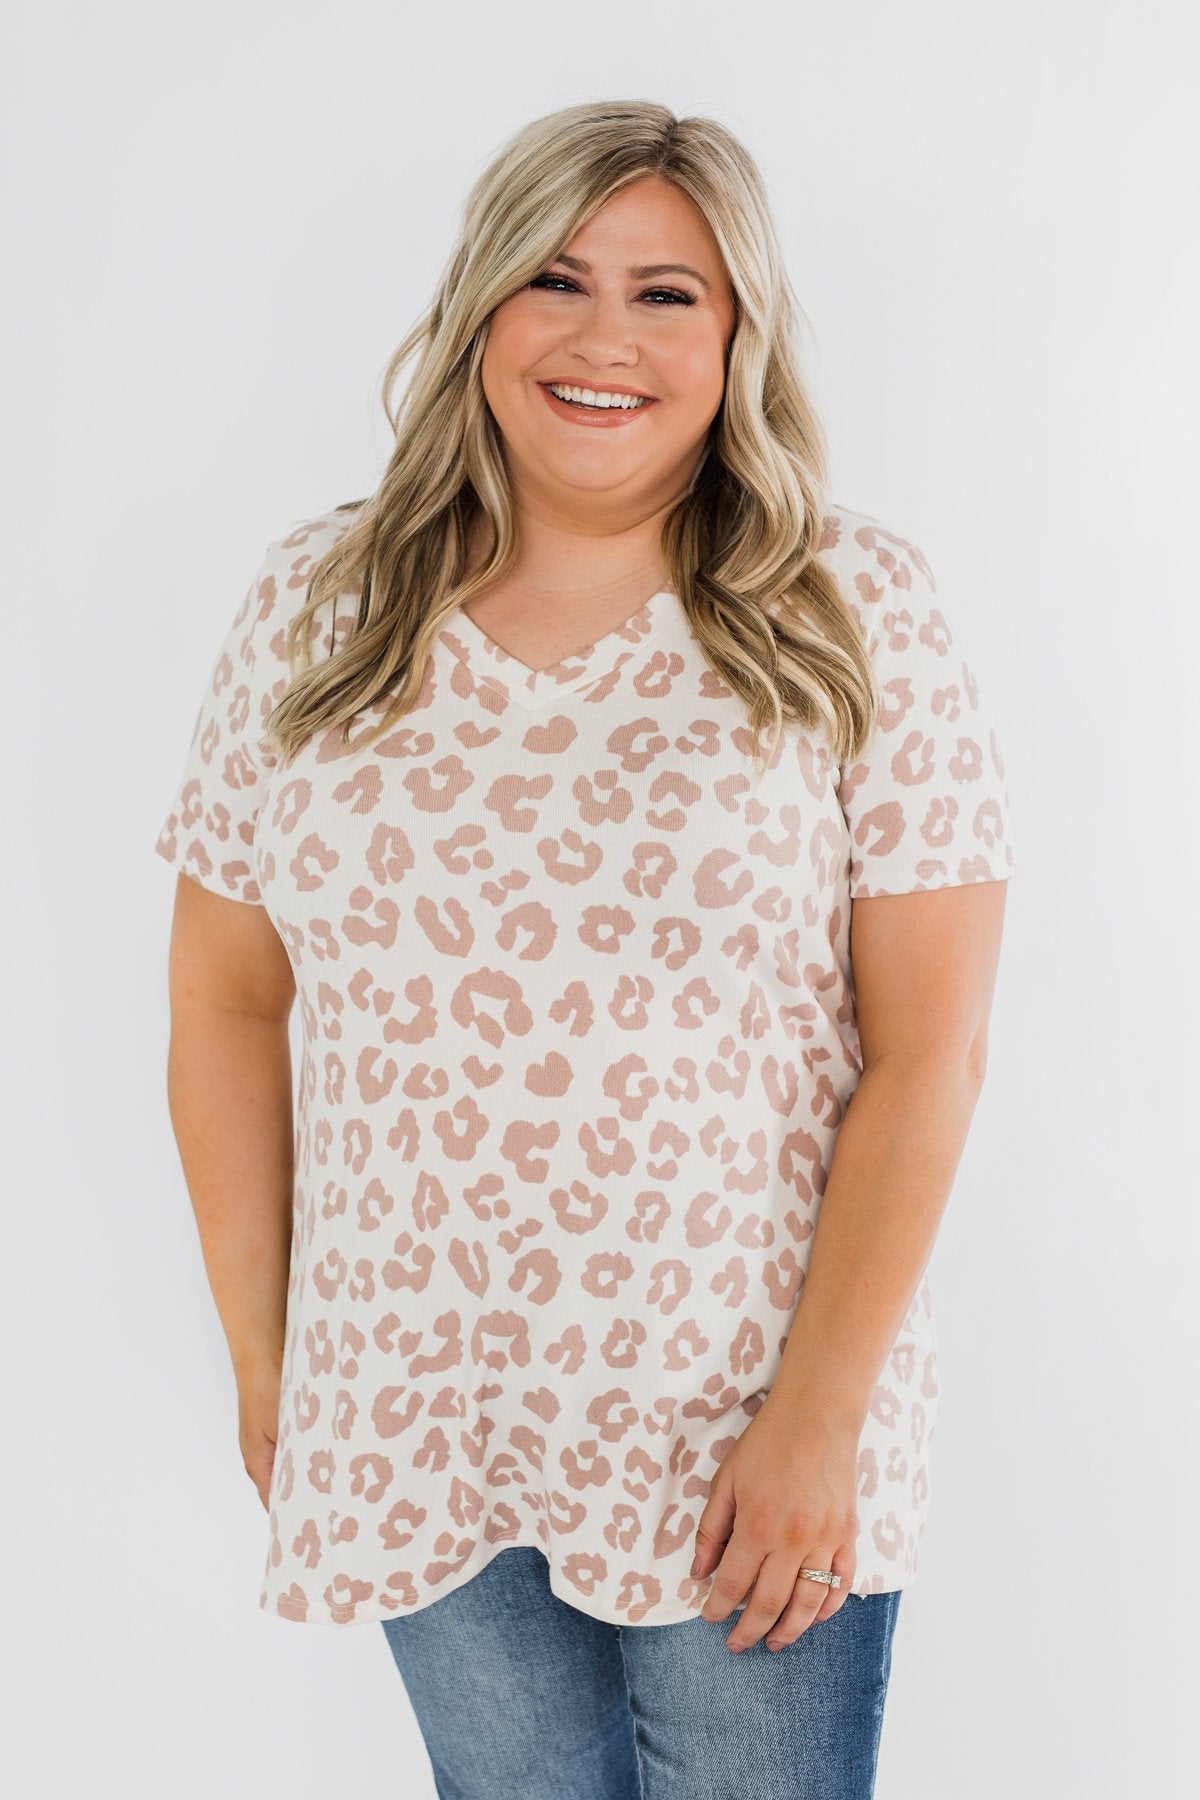 One Simple Wish Leopard V-Neck Top- Cream & Pale Taupe